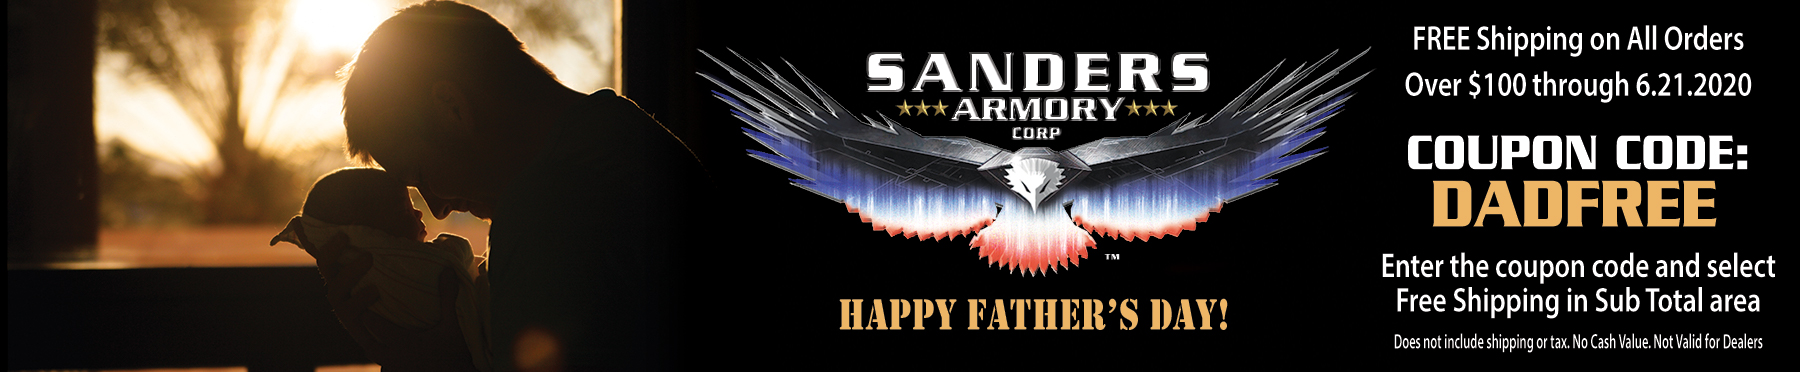 Sanders Armory Fathers Day BANNER 2020